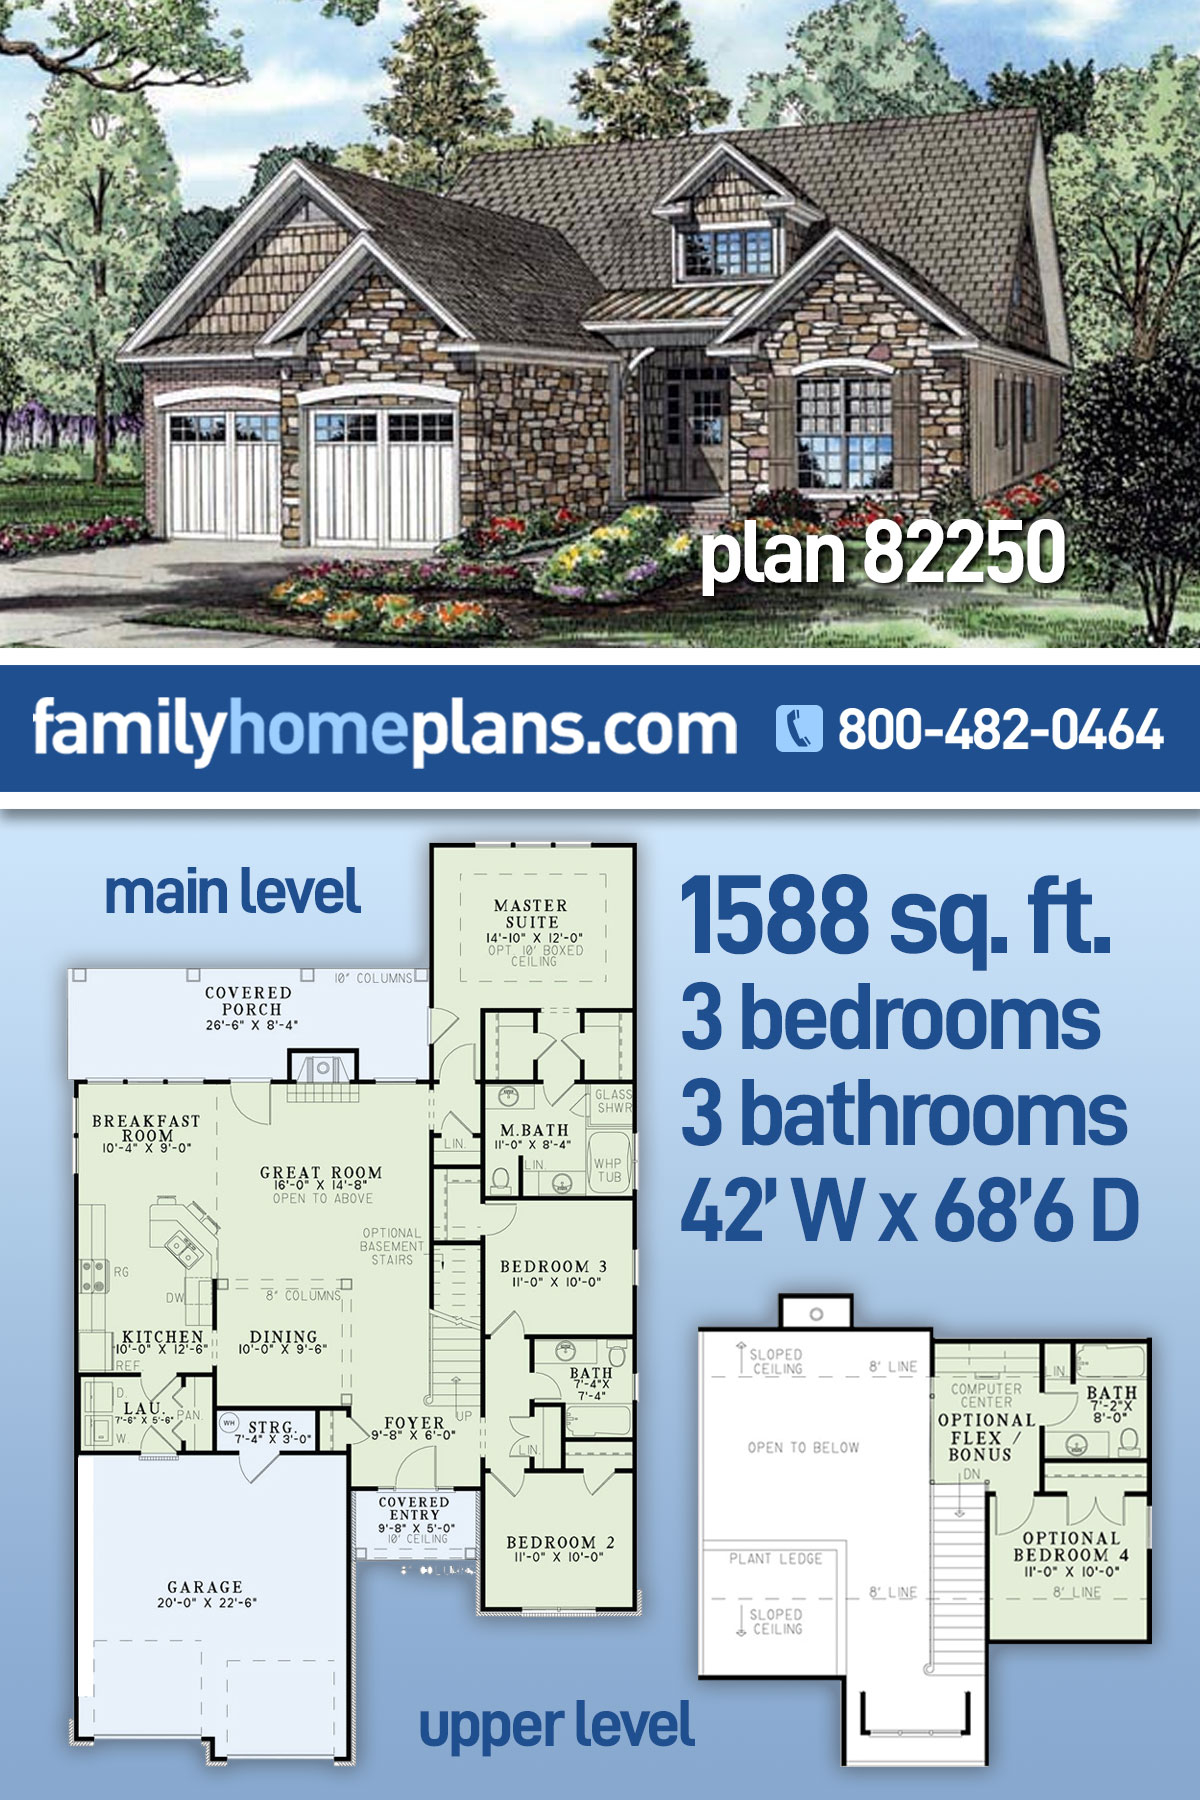 Plan 82250 | Narrow Lot Style with 3 Bed, 3 Bath, 2 Car Garage